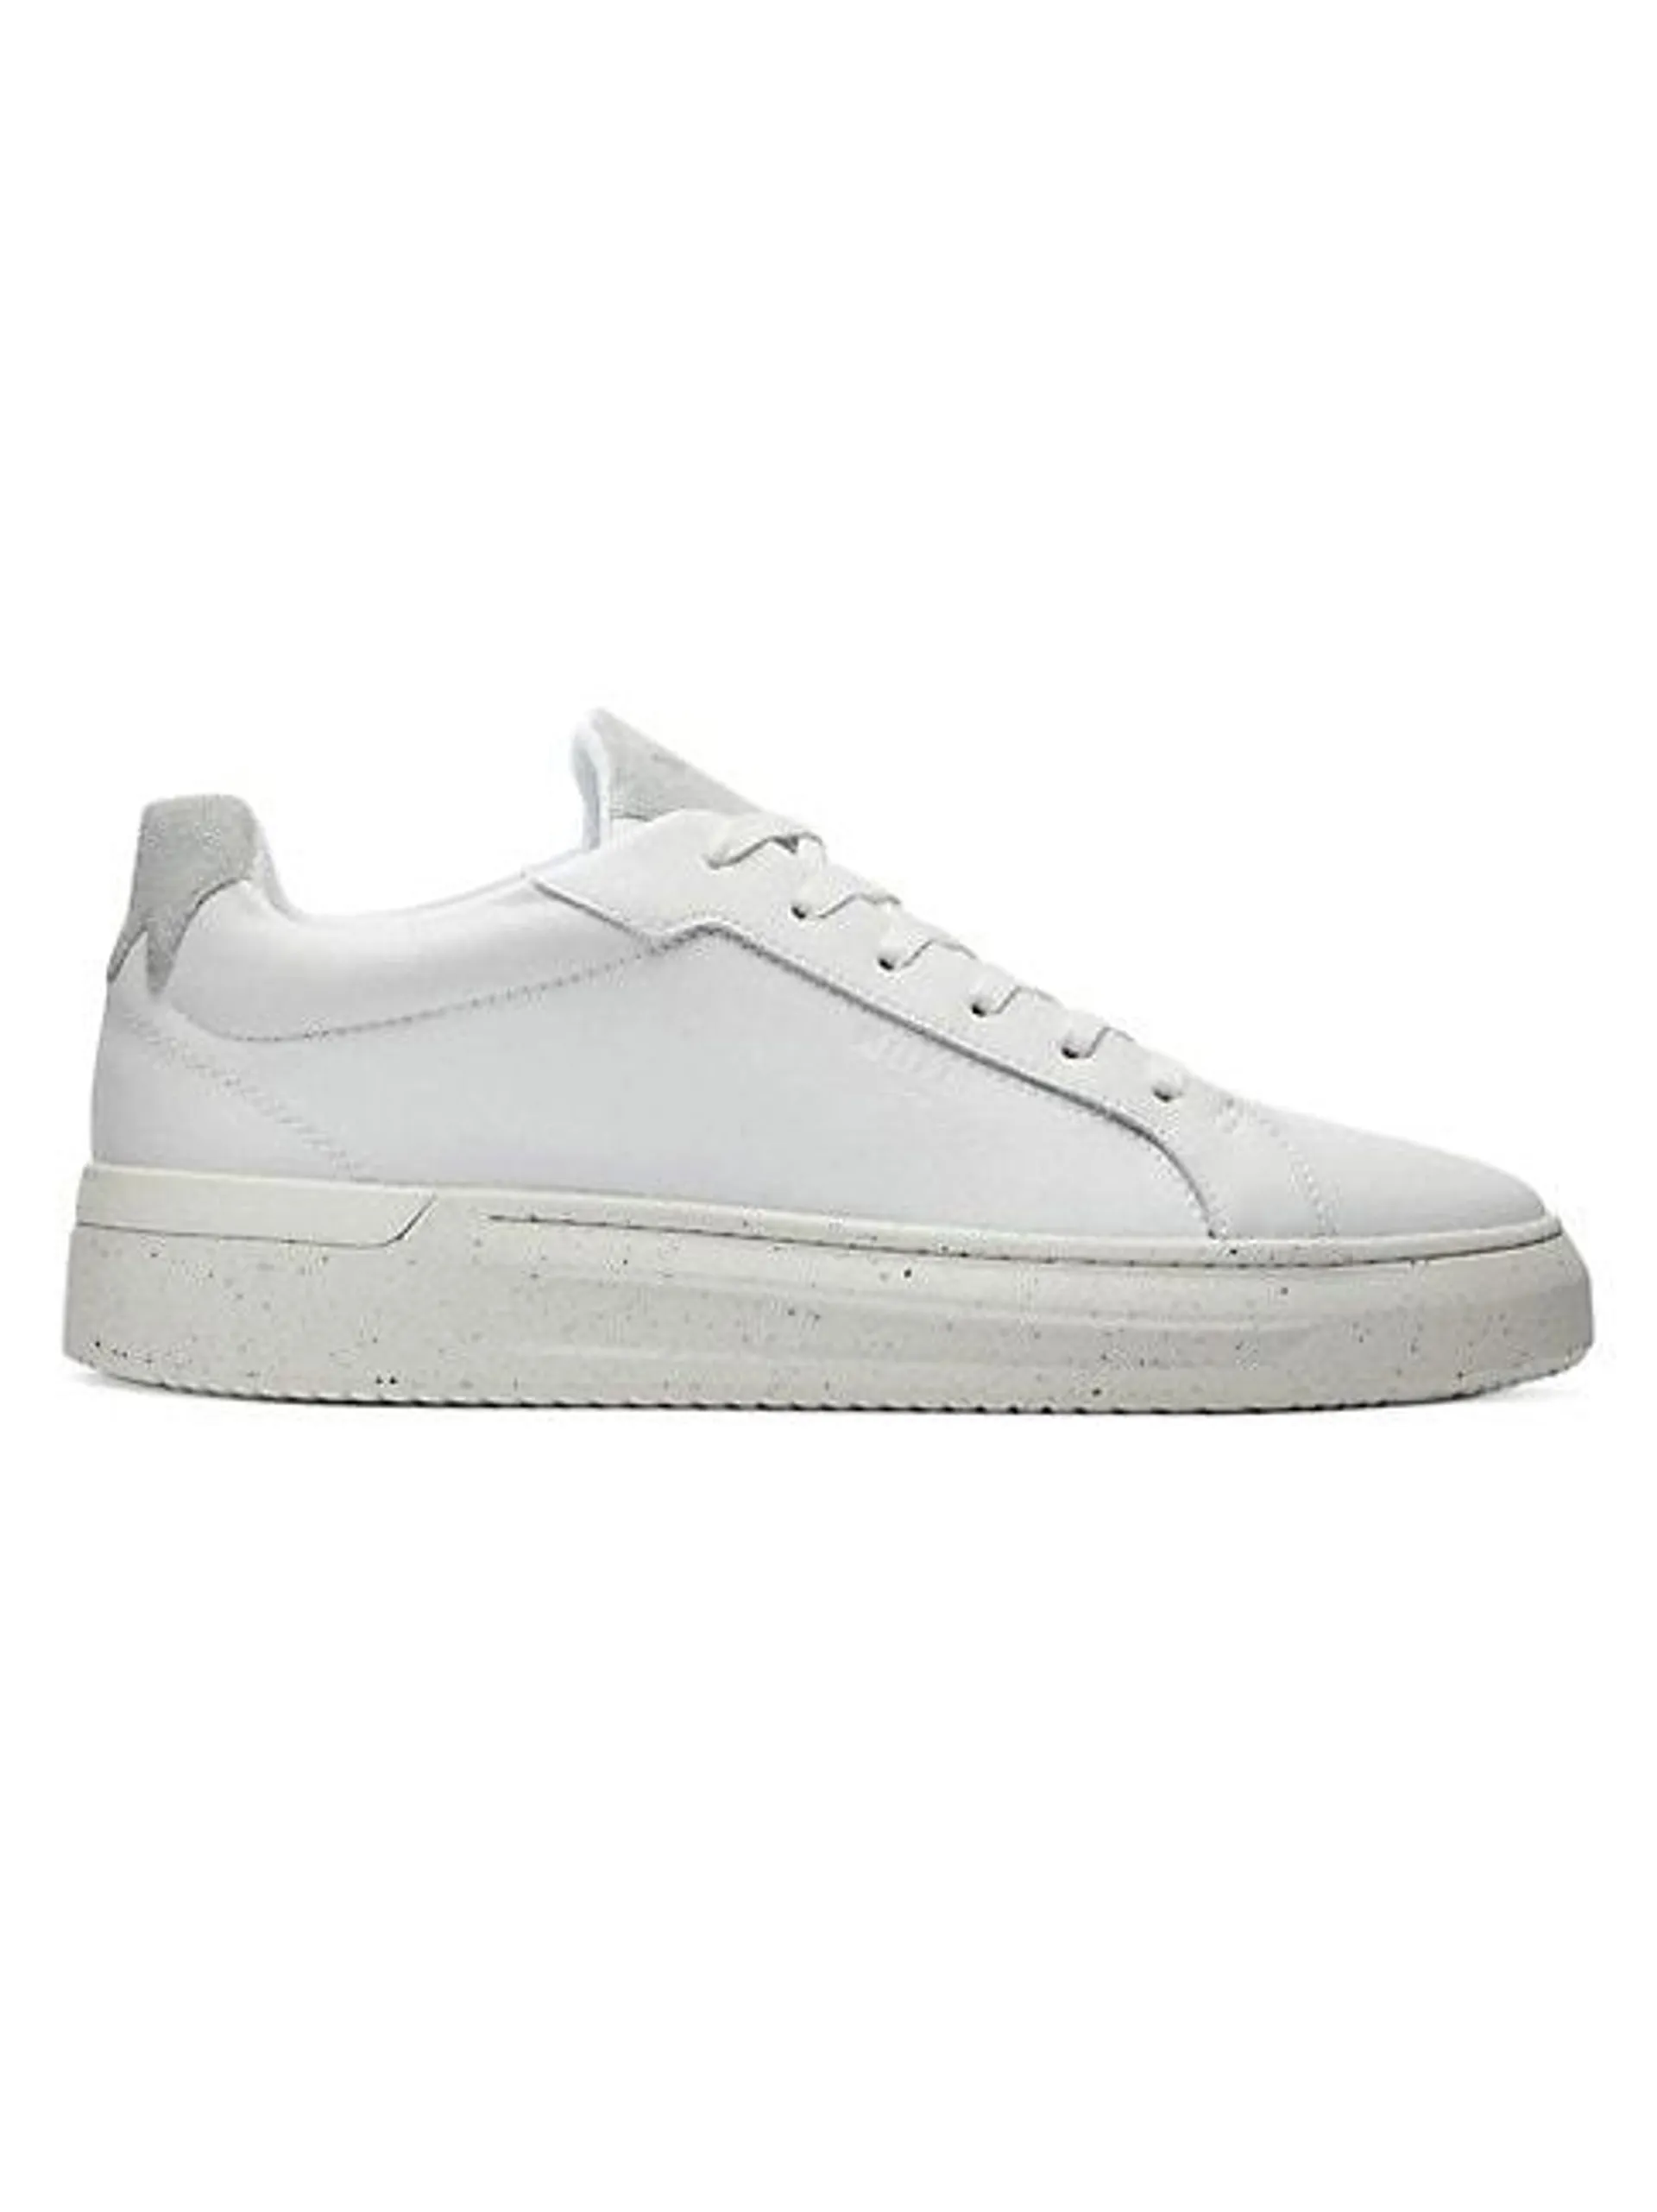 GRFTR Leather Sneakers